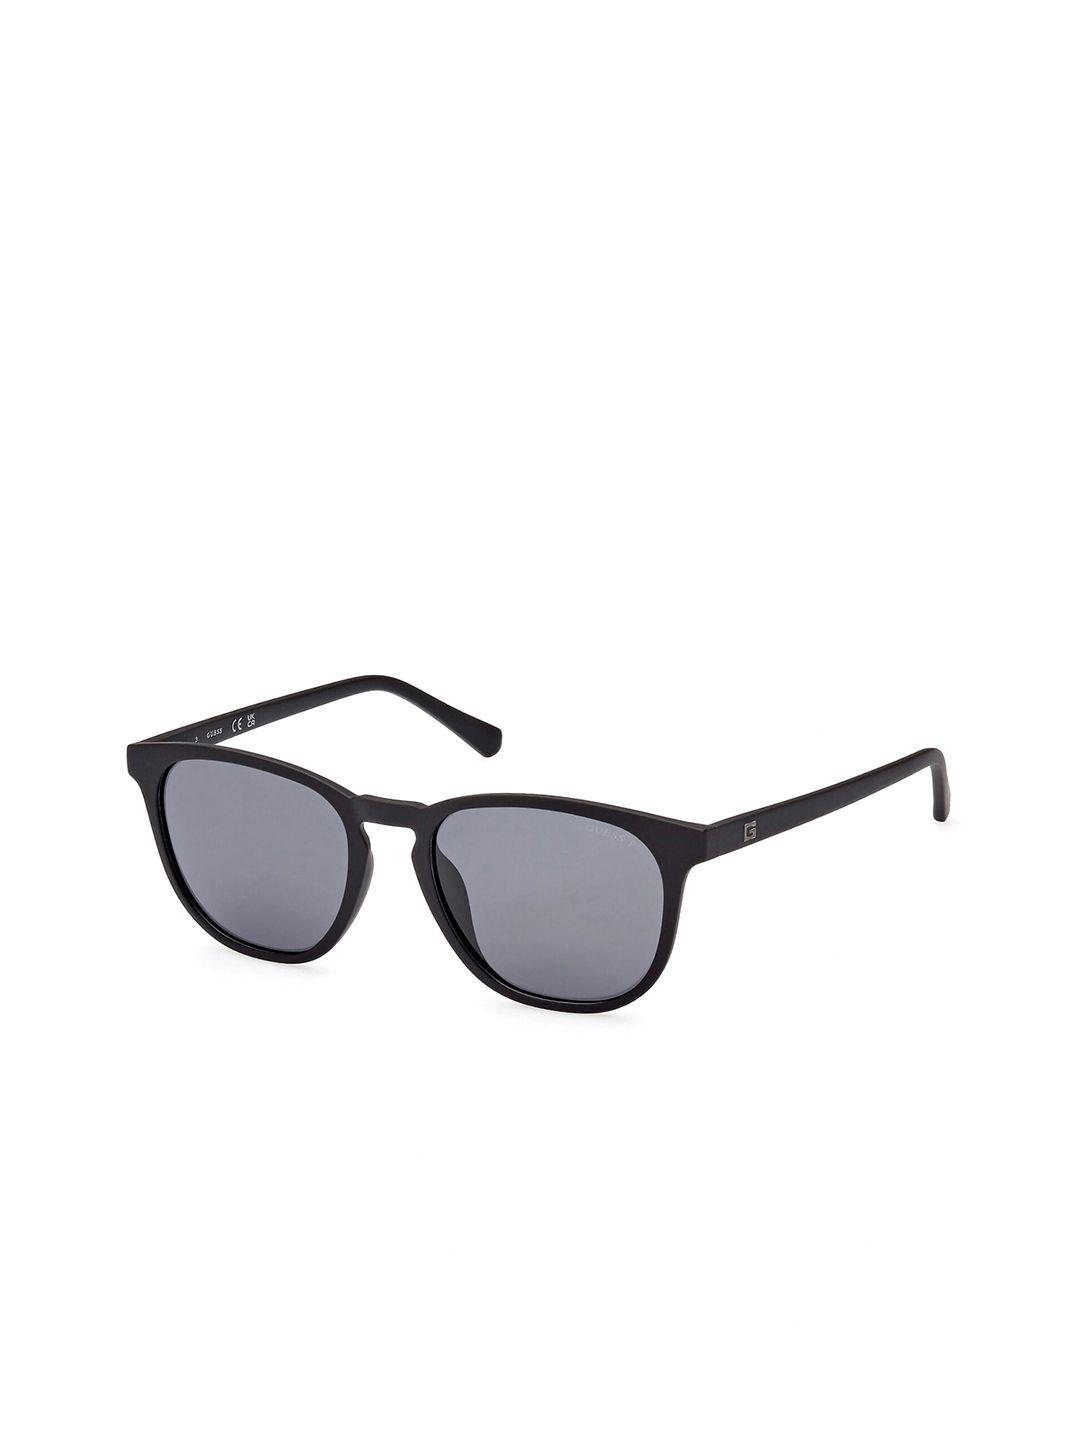 GUESS Square Sunglasses with UV Protected Lens